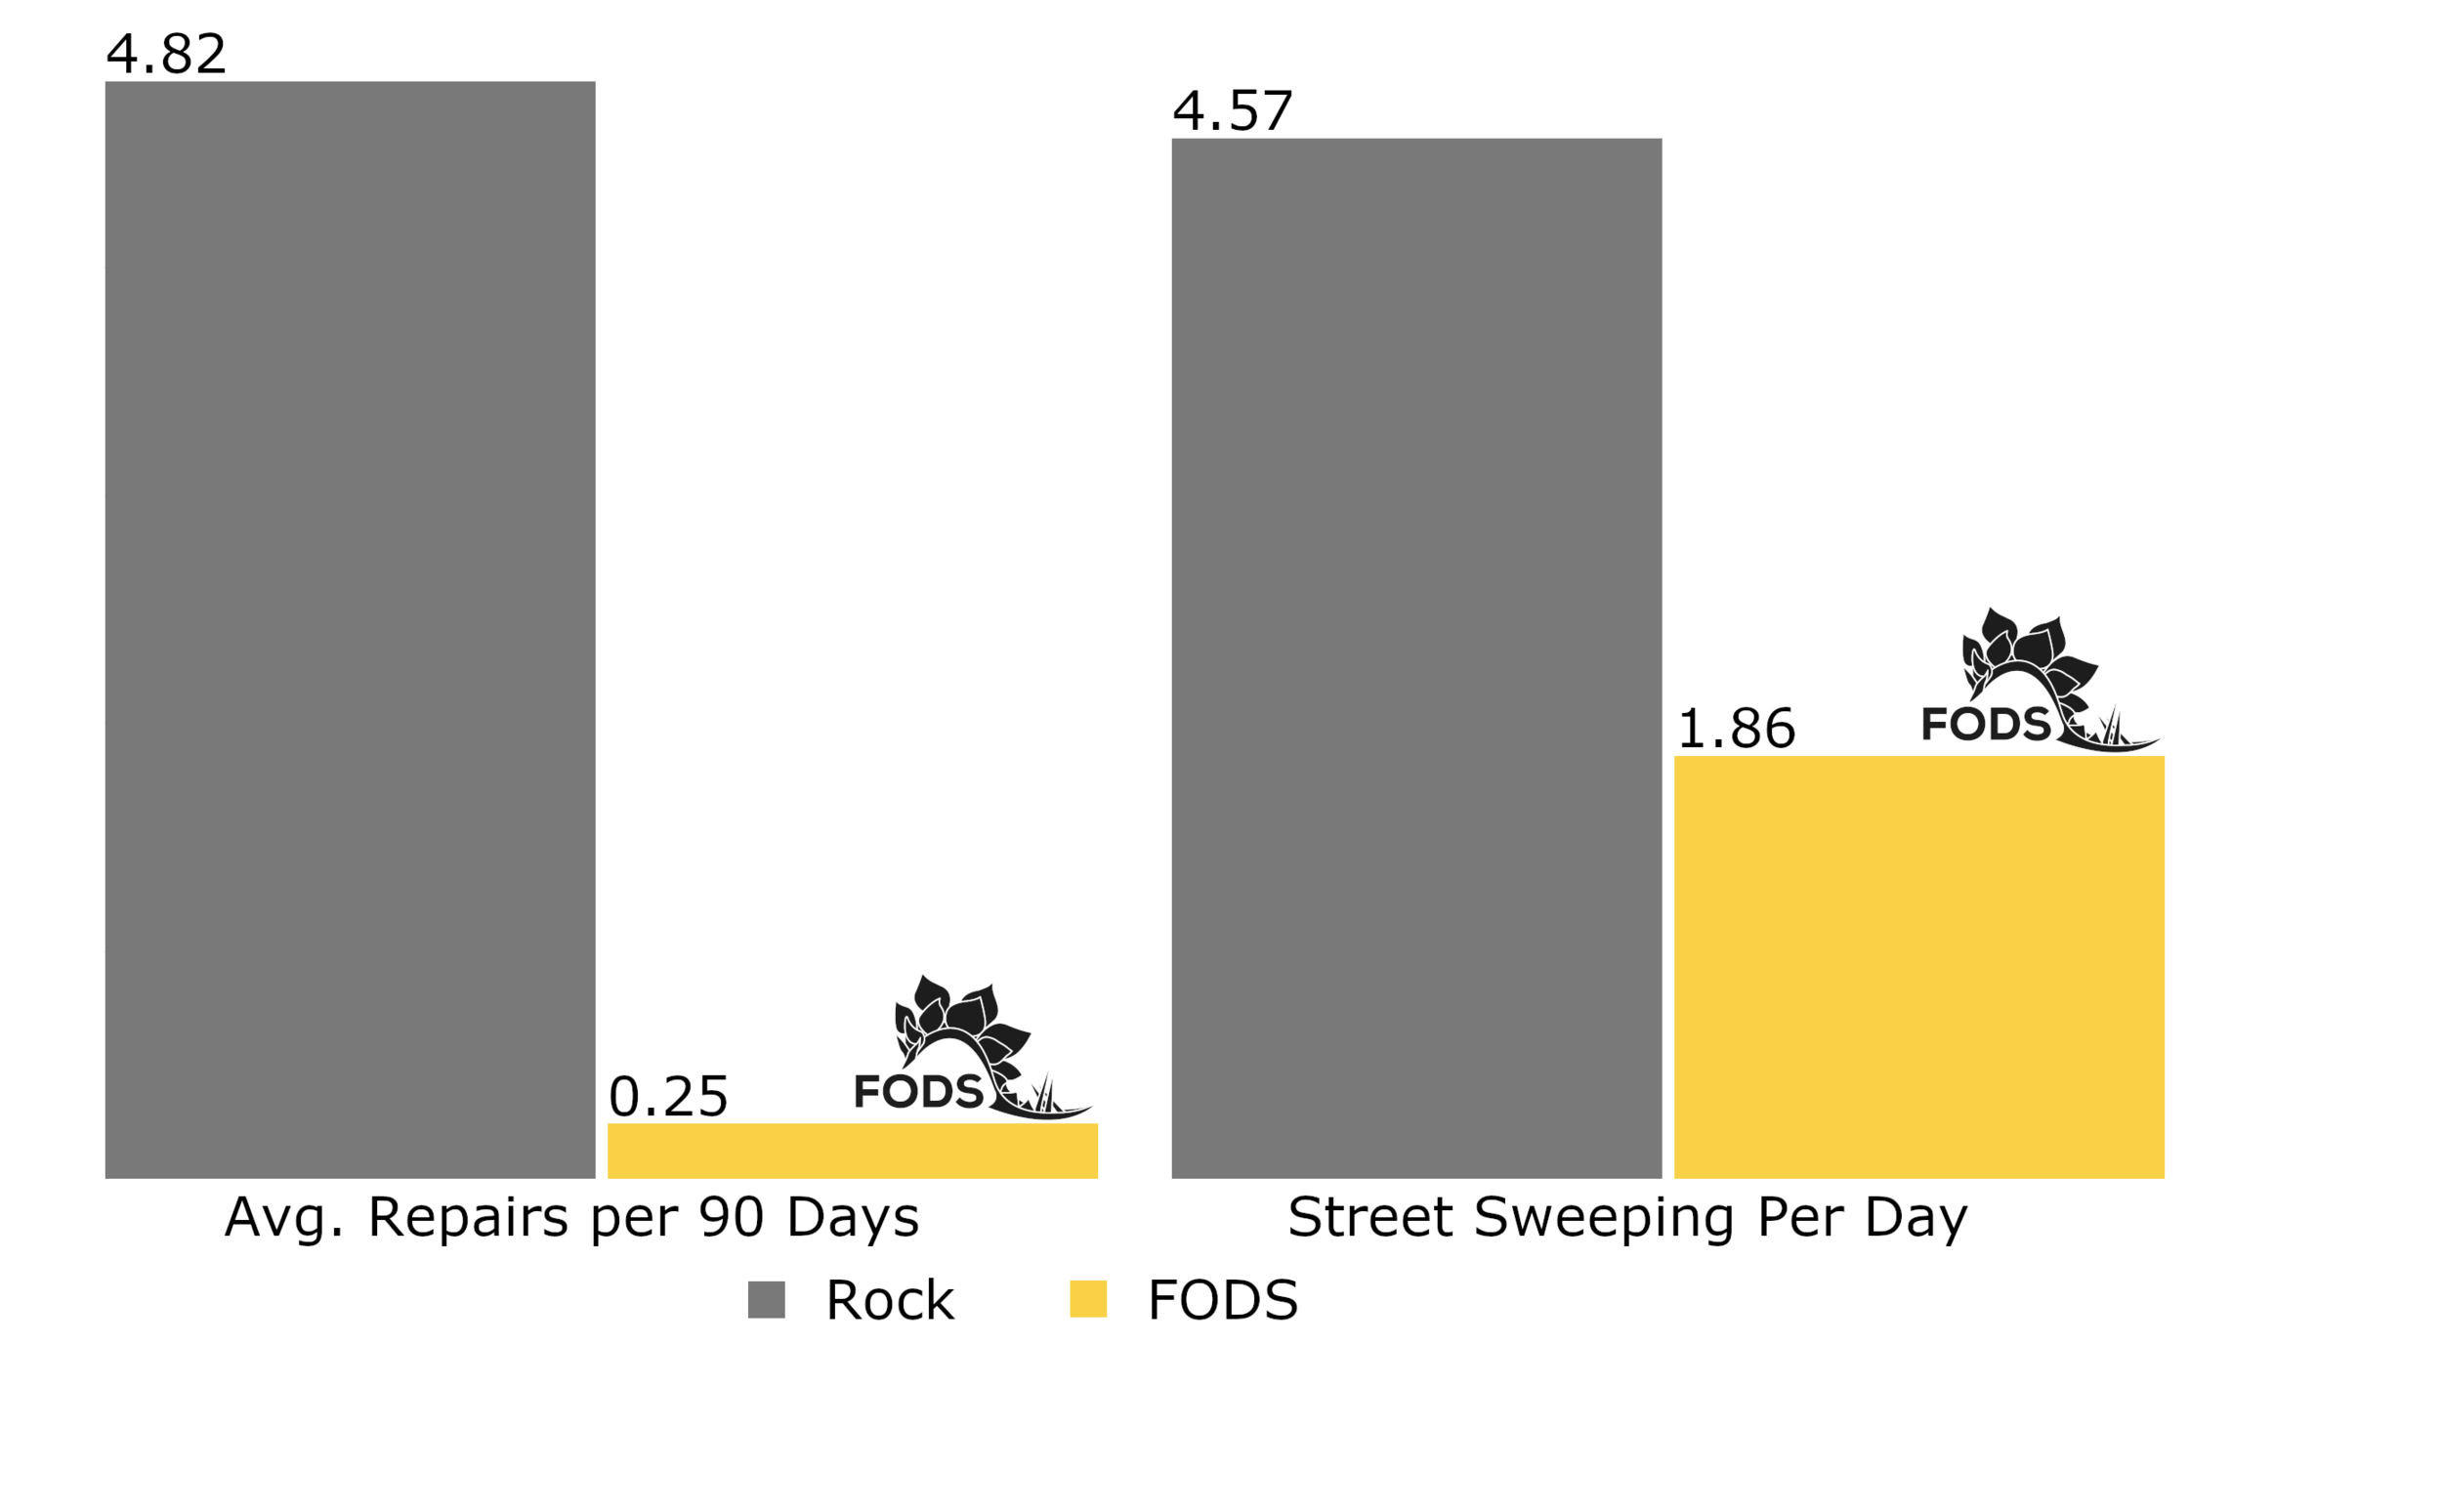 Rock-Vs-FODS-Construction-Entrance+Bar+Graph-Report-Results-From-Field-Test.png